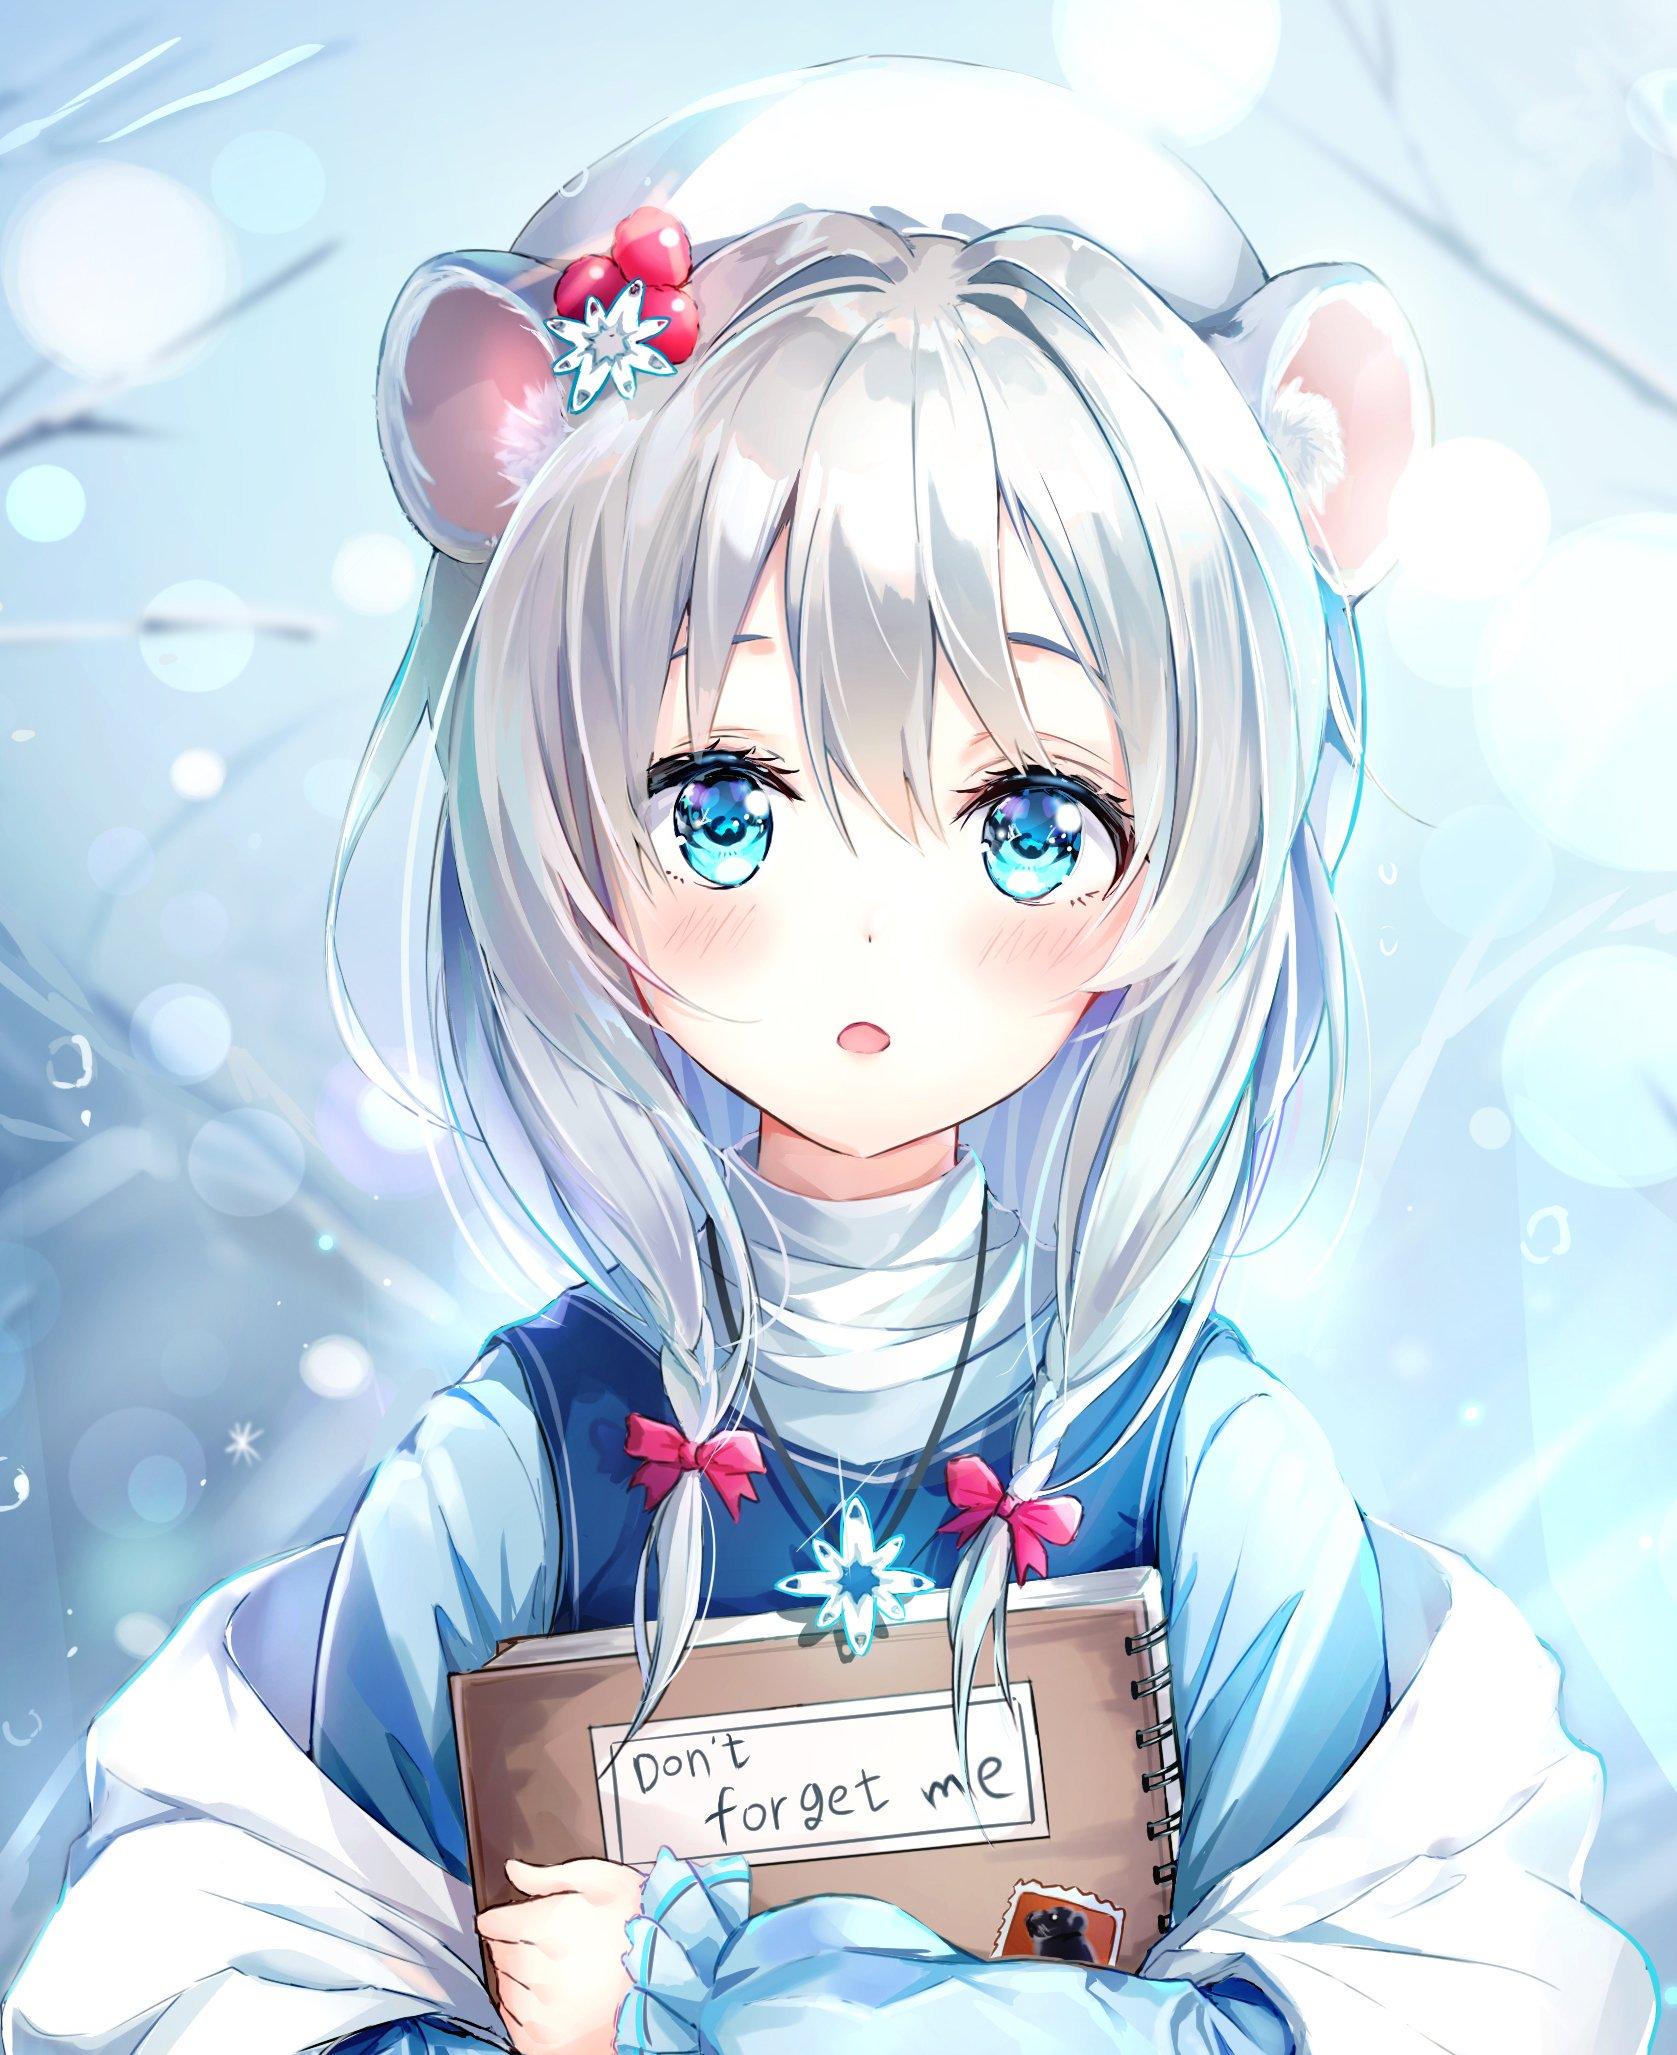 anime girl white hair blue eyes - Online Discount Shop for Electronics